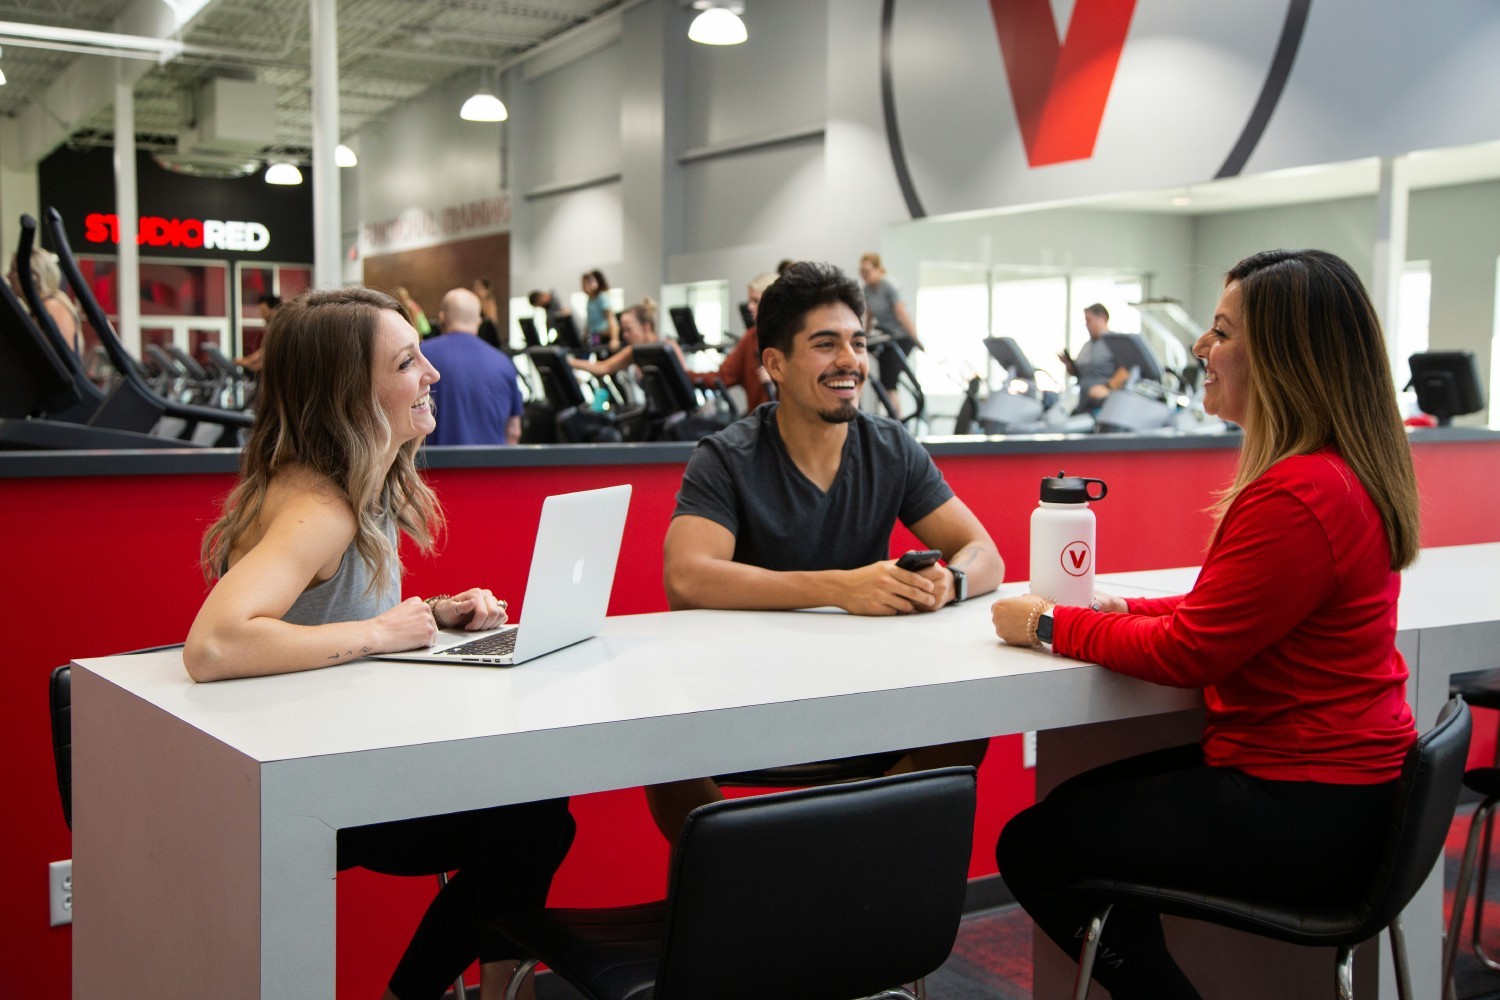 Team members enjoy socializing at one of VASA’s community tables, located near the entrance of the club.